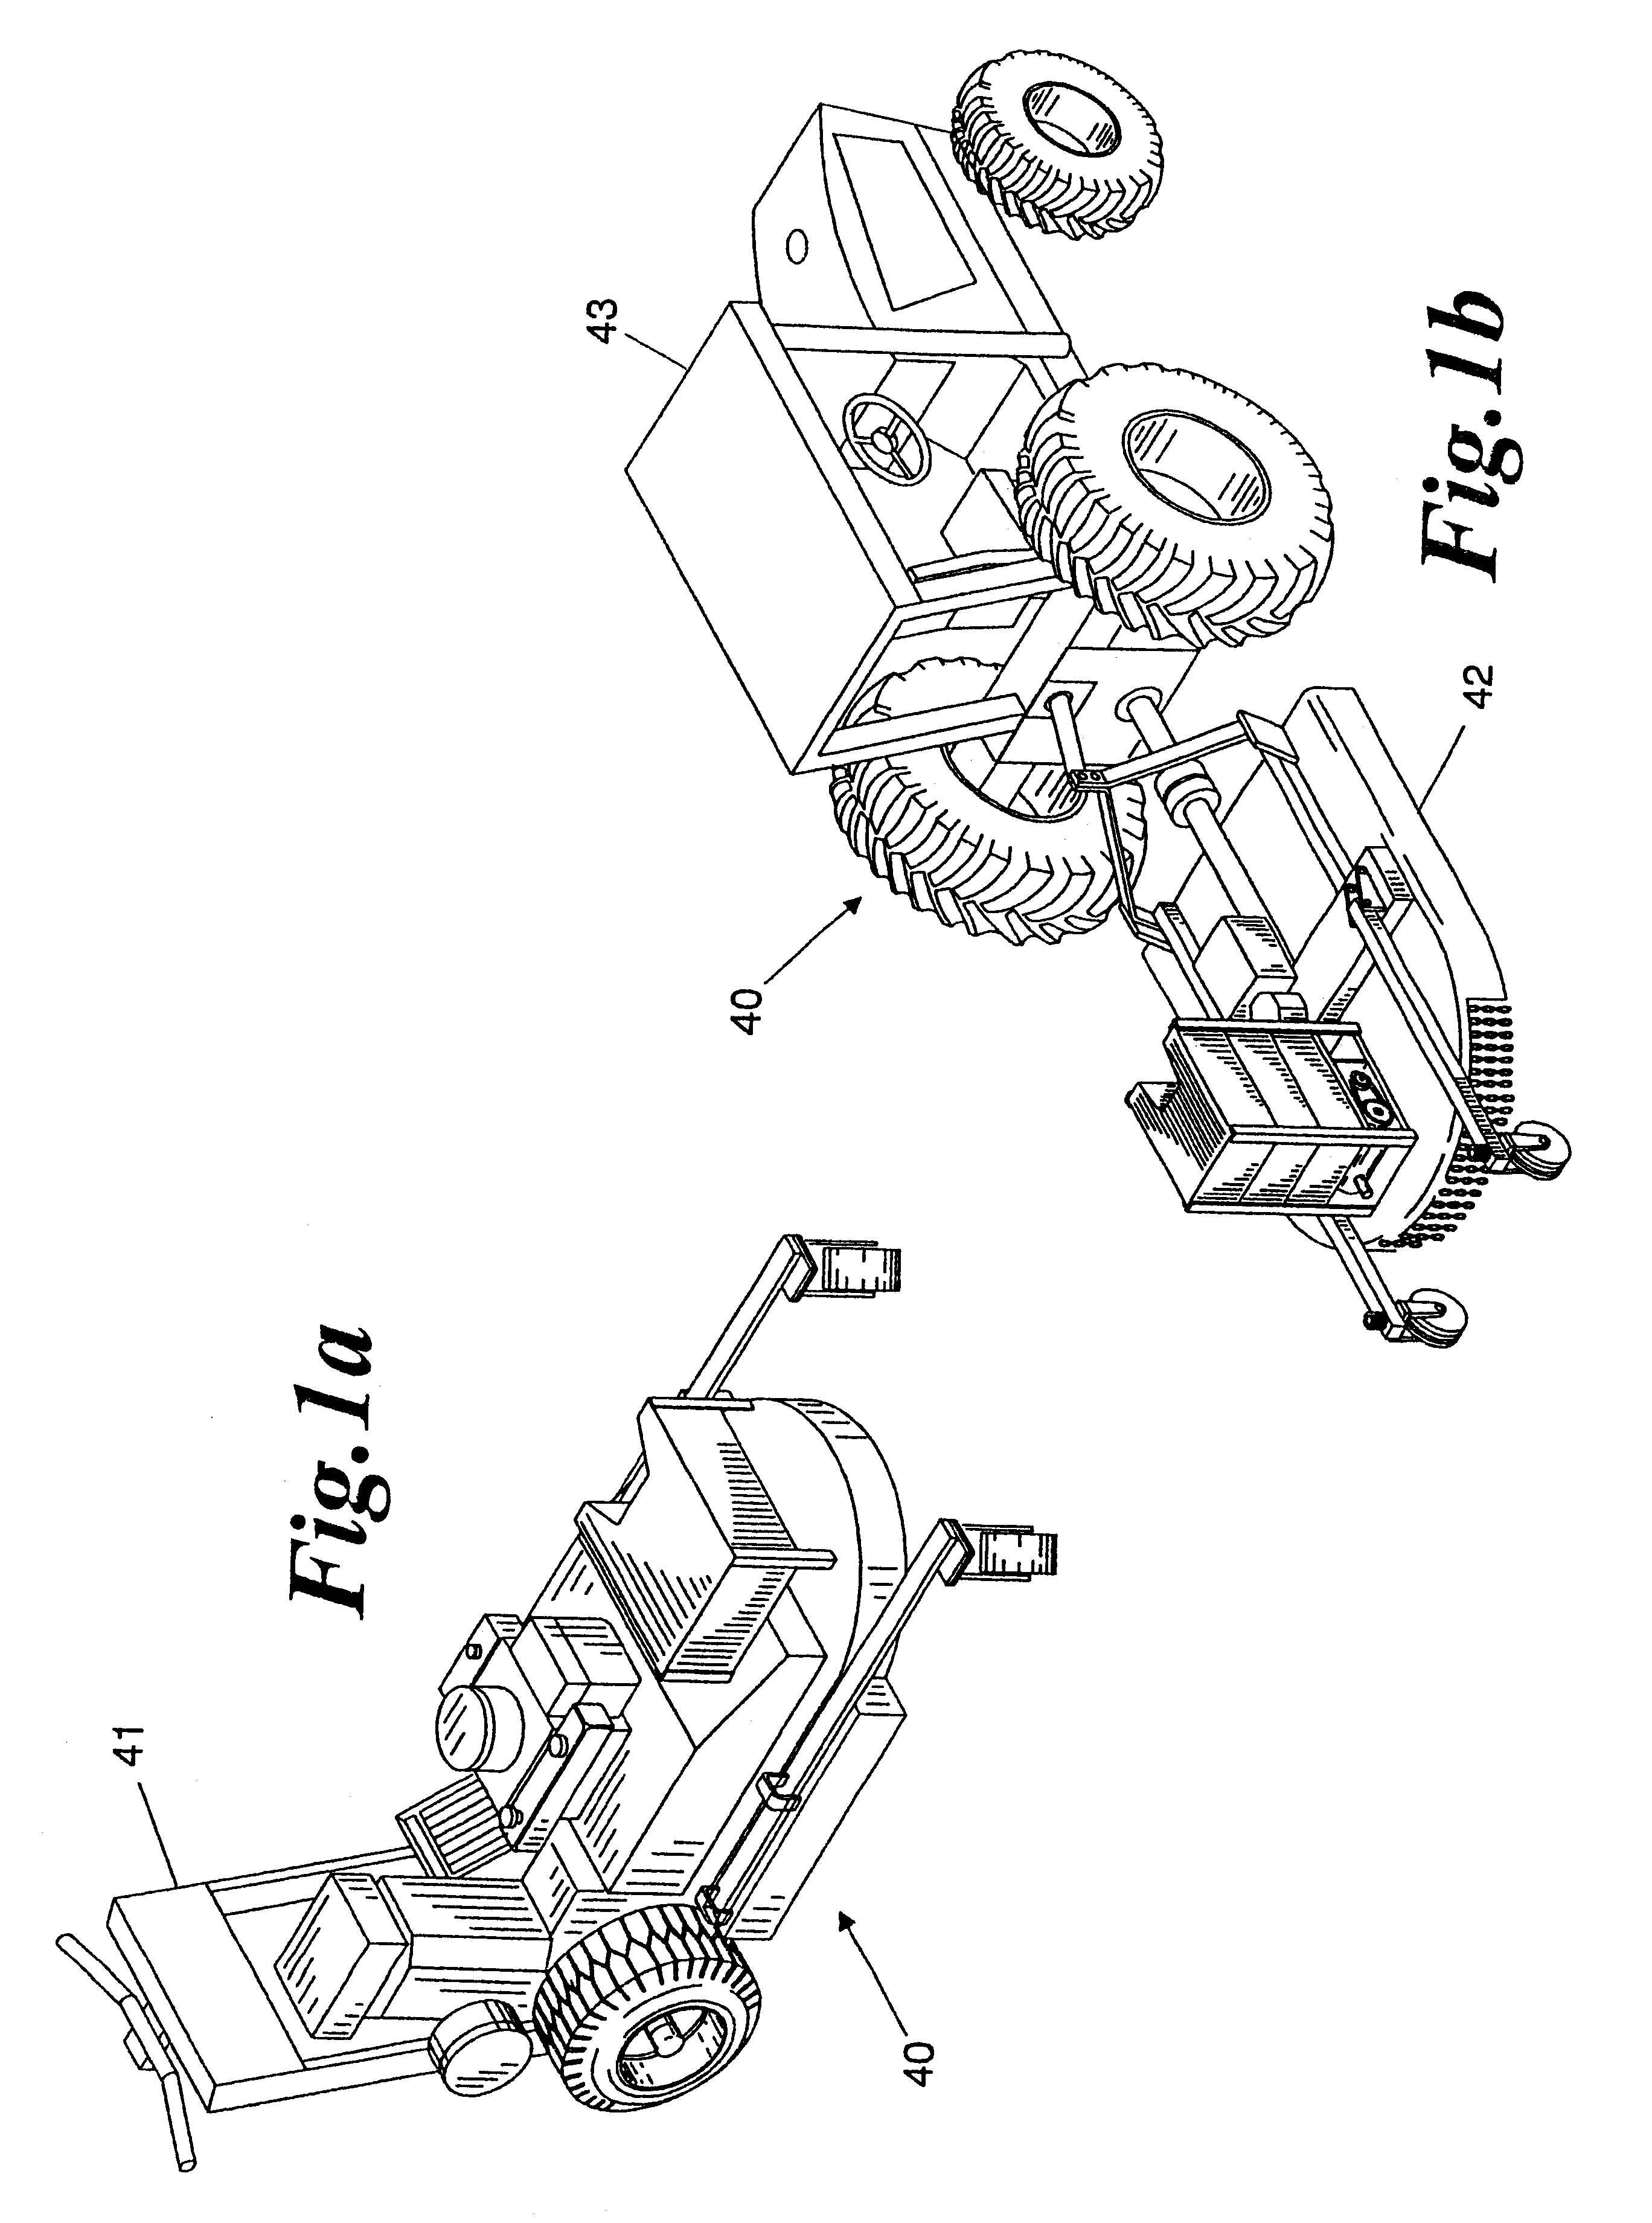 Method for cutting and treating vegetation